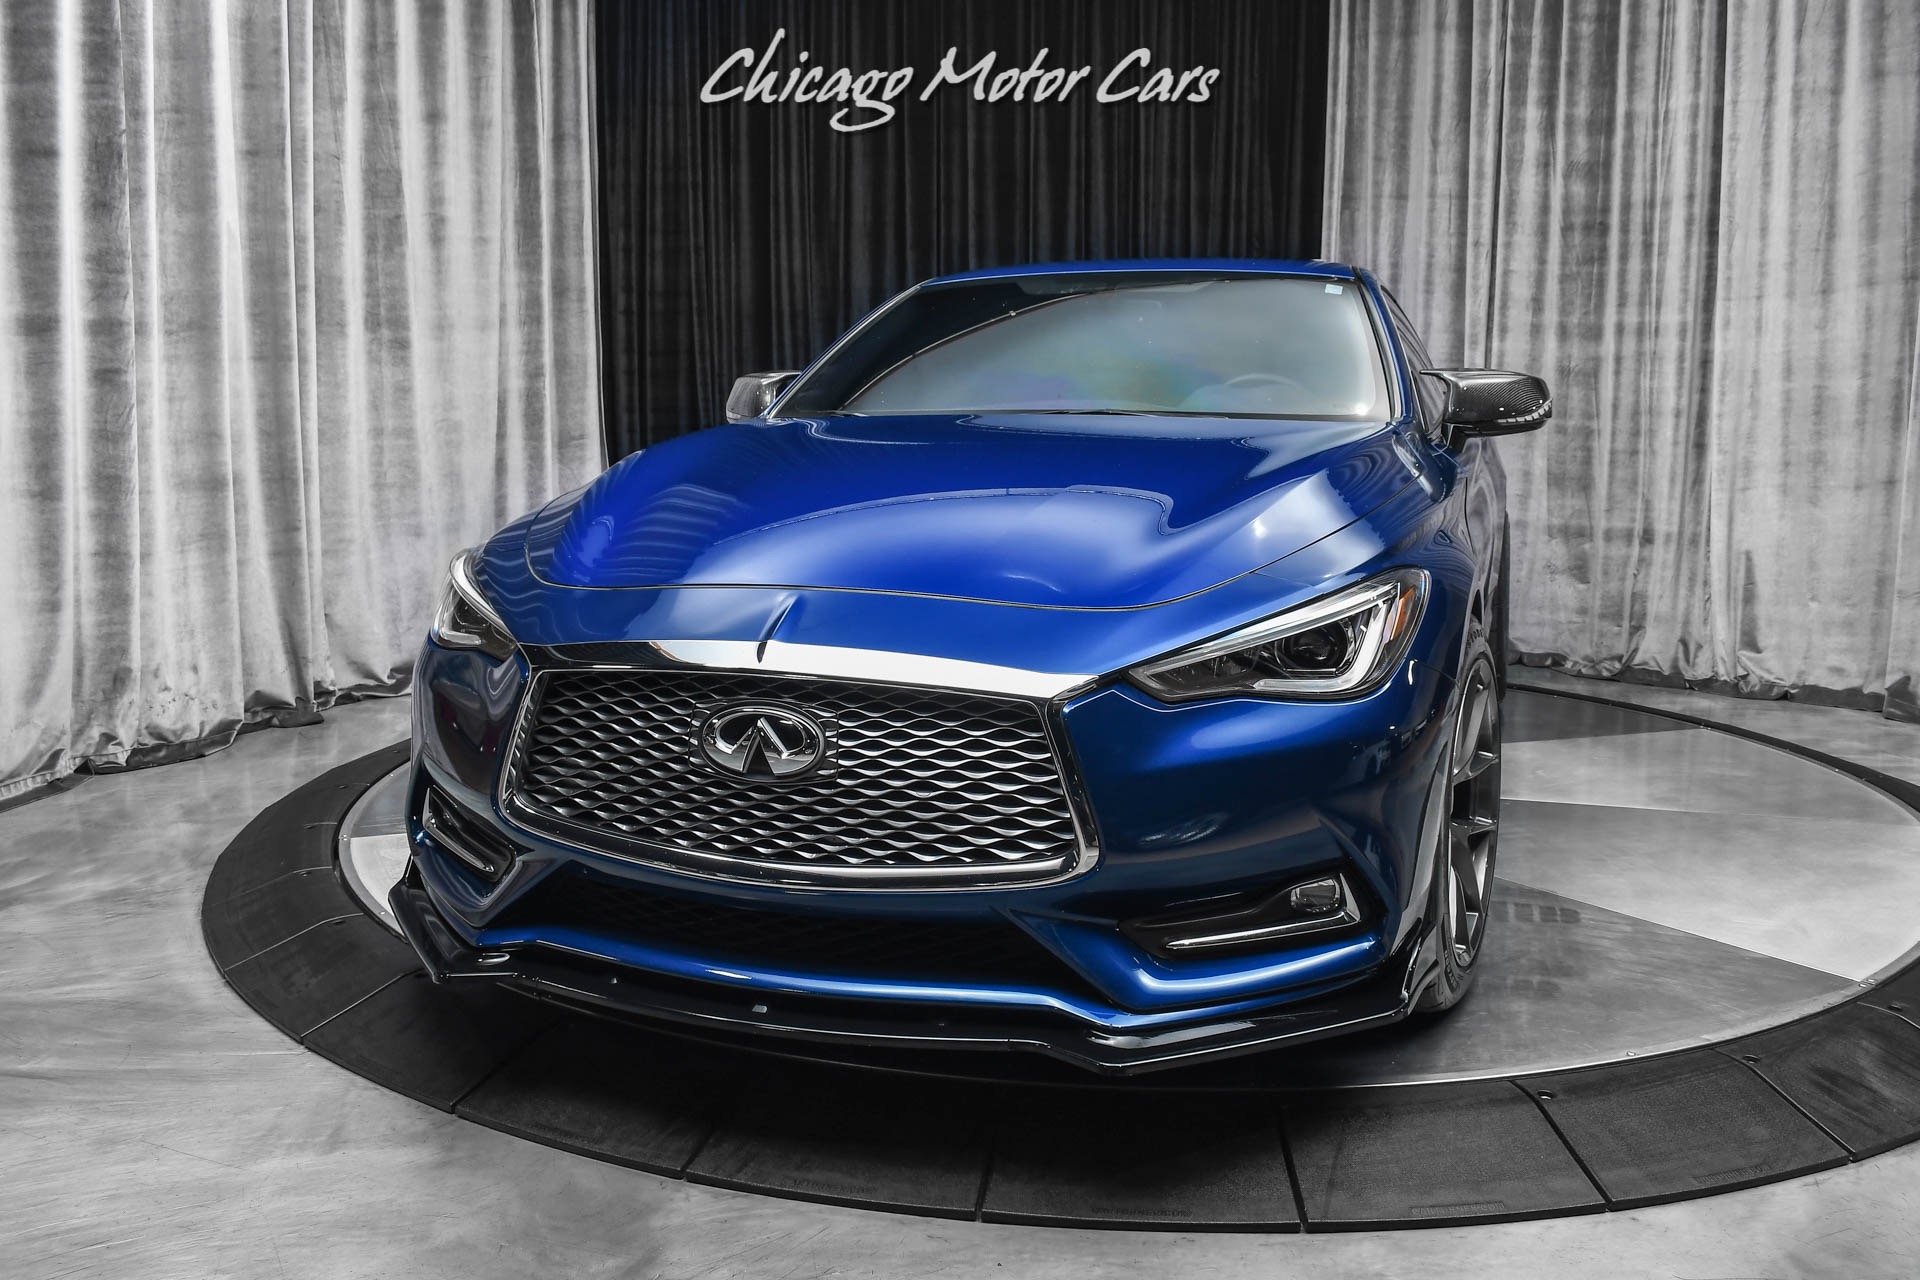 Used-2018-Infiniti-Q60-30T-Sport-Coupe-AMS-PERFOMANCE-500WHP-AWD-54K-MSRP-LOADED